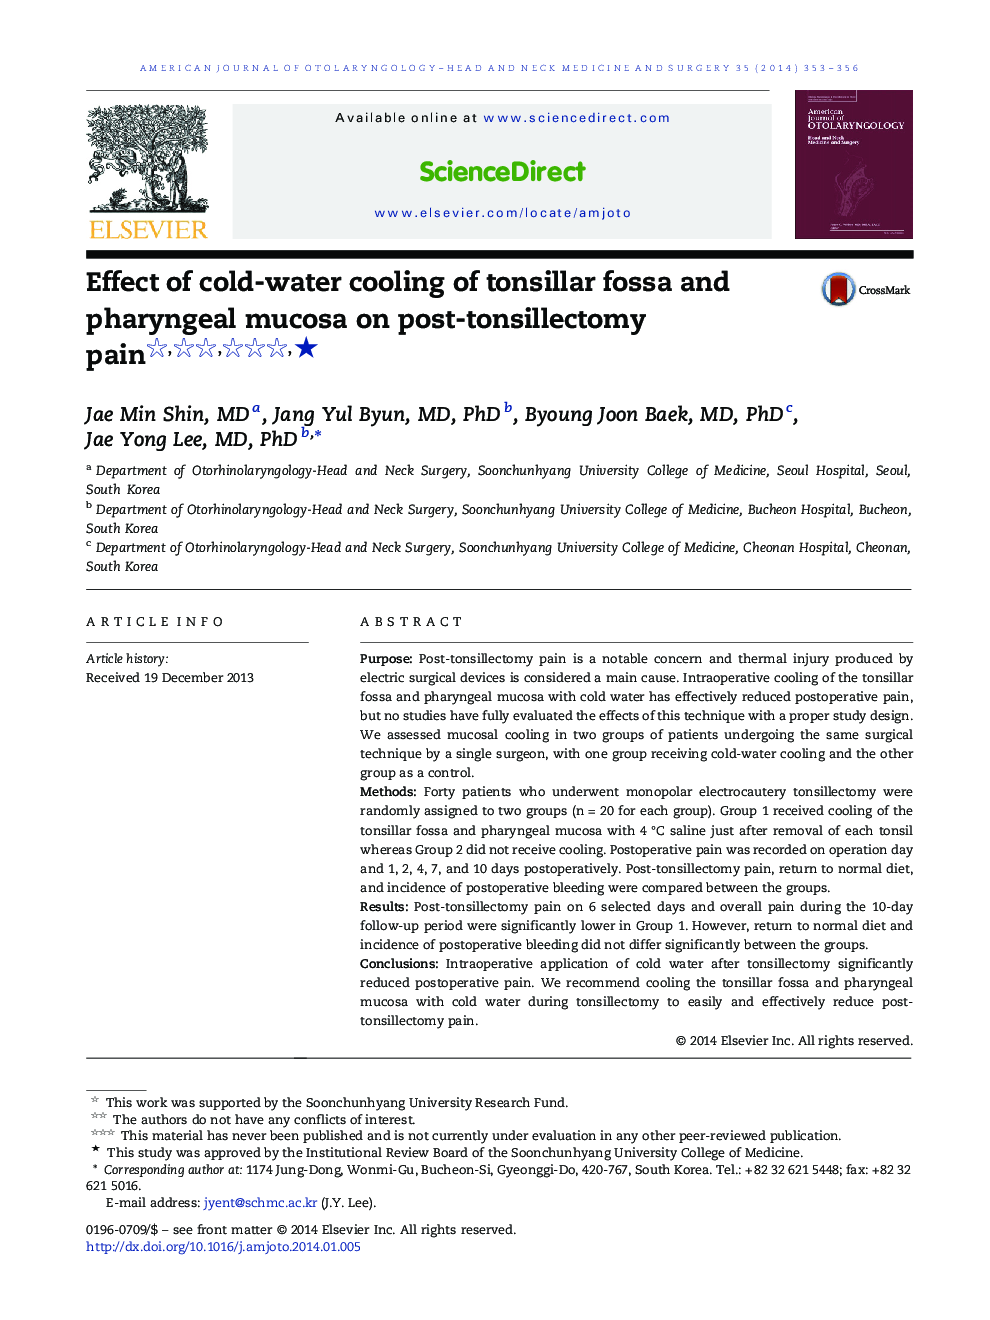 Effect of cold-water cooling of tonsillar fossa and pharyngeal mucosa on post-tonsillectomy pain ★